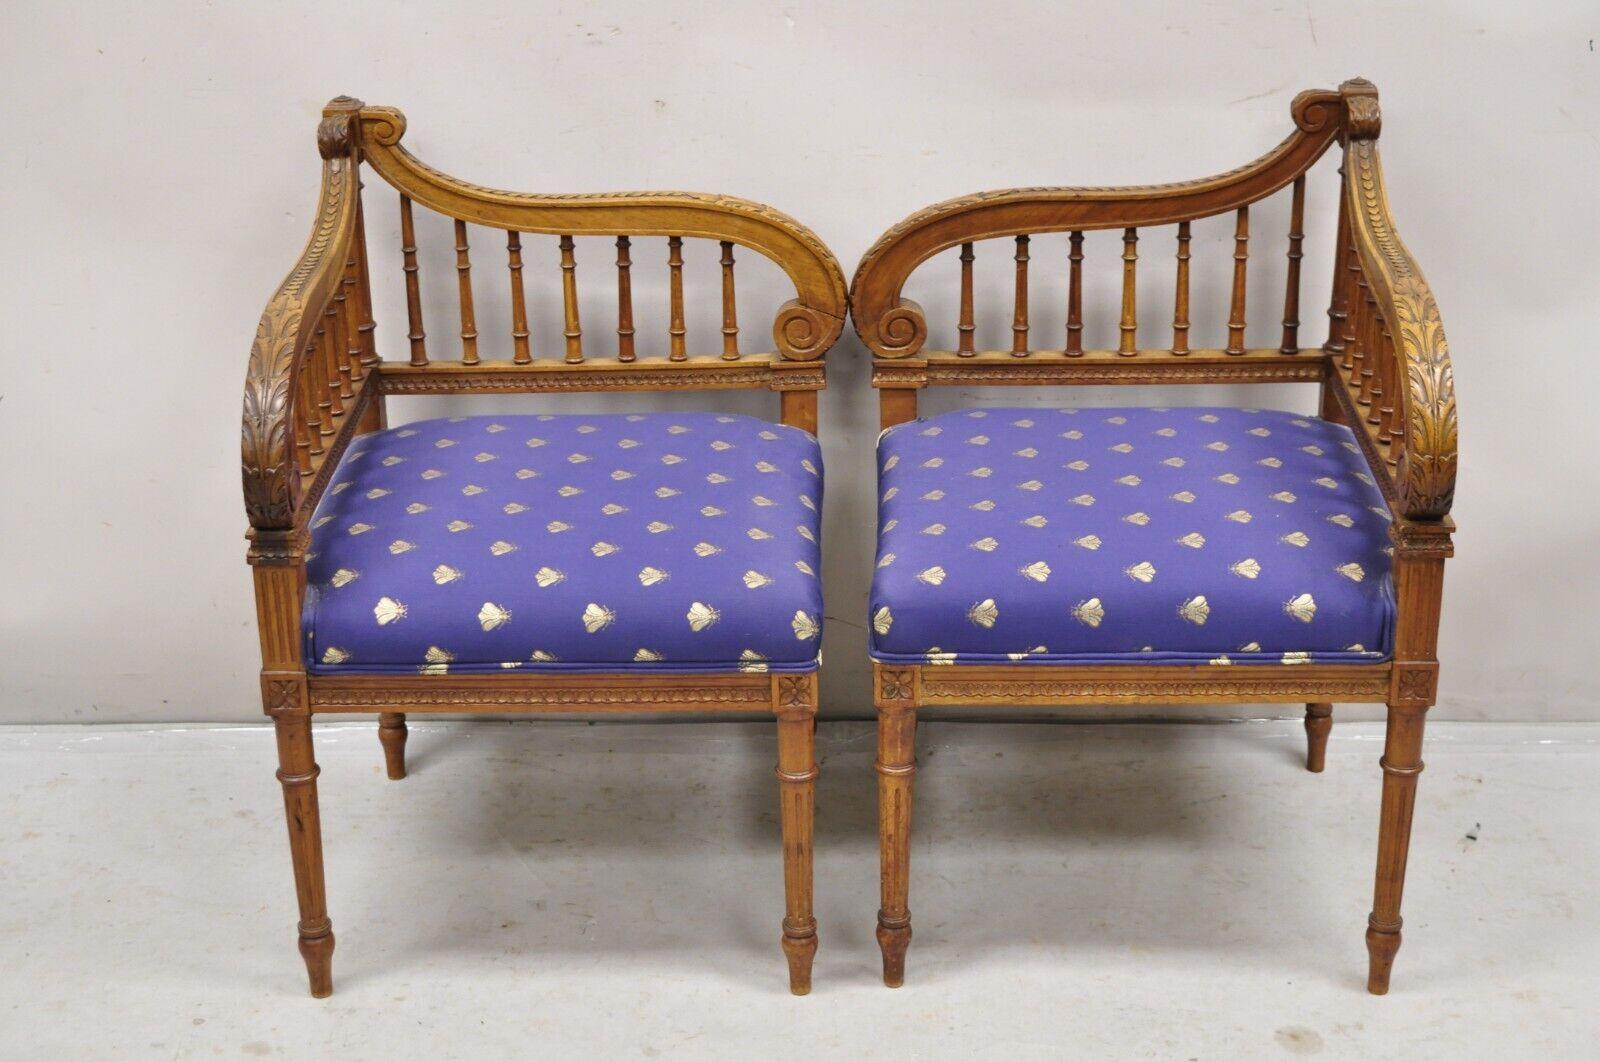 Antique French Louis XVI Style Carved Walnut Lyre Harp Corner Chairs - a Pair In Good Condition For Sale In Philadelphia, PA